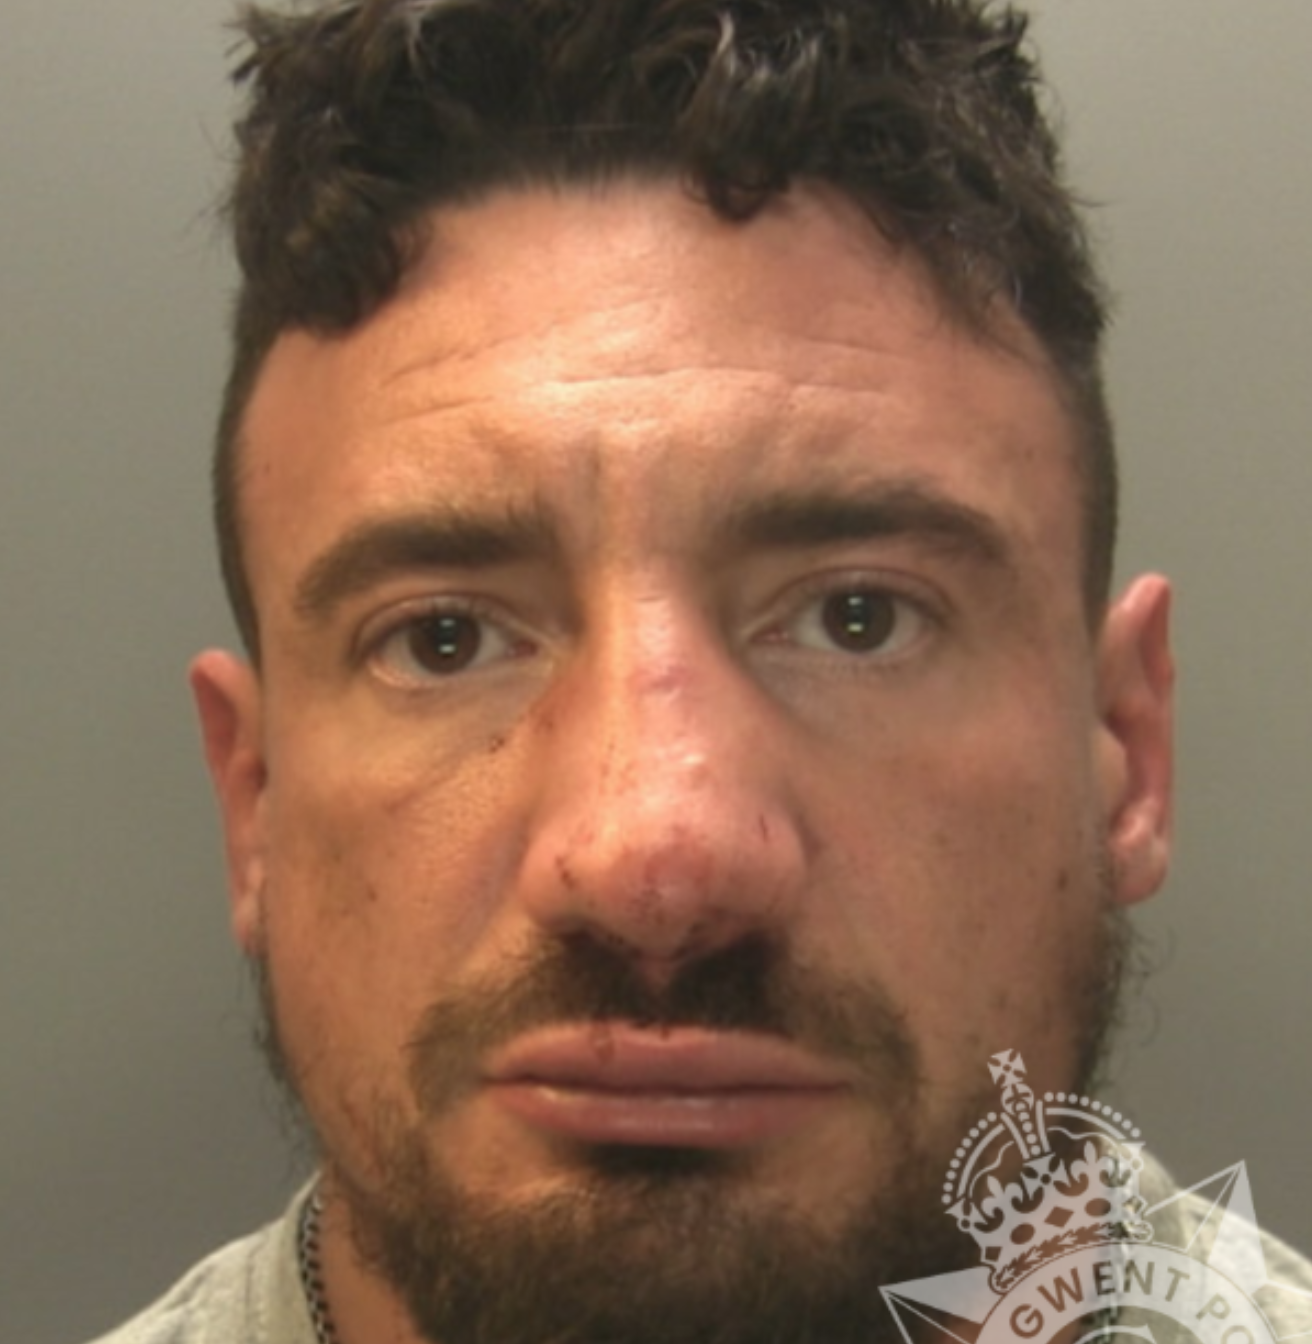 Man jailed for causing death while driving under the influence